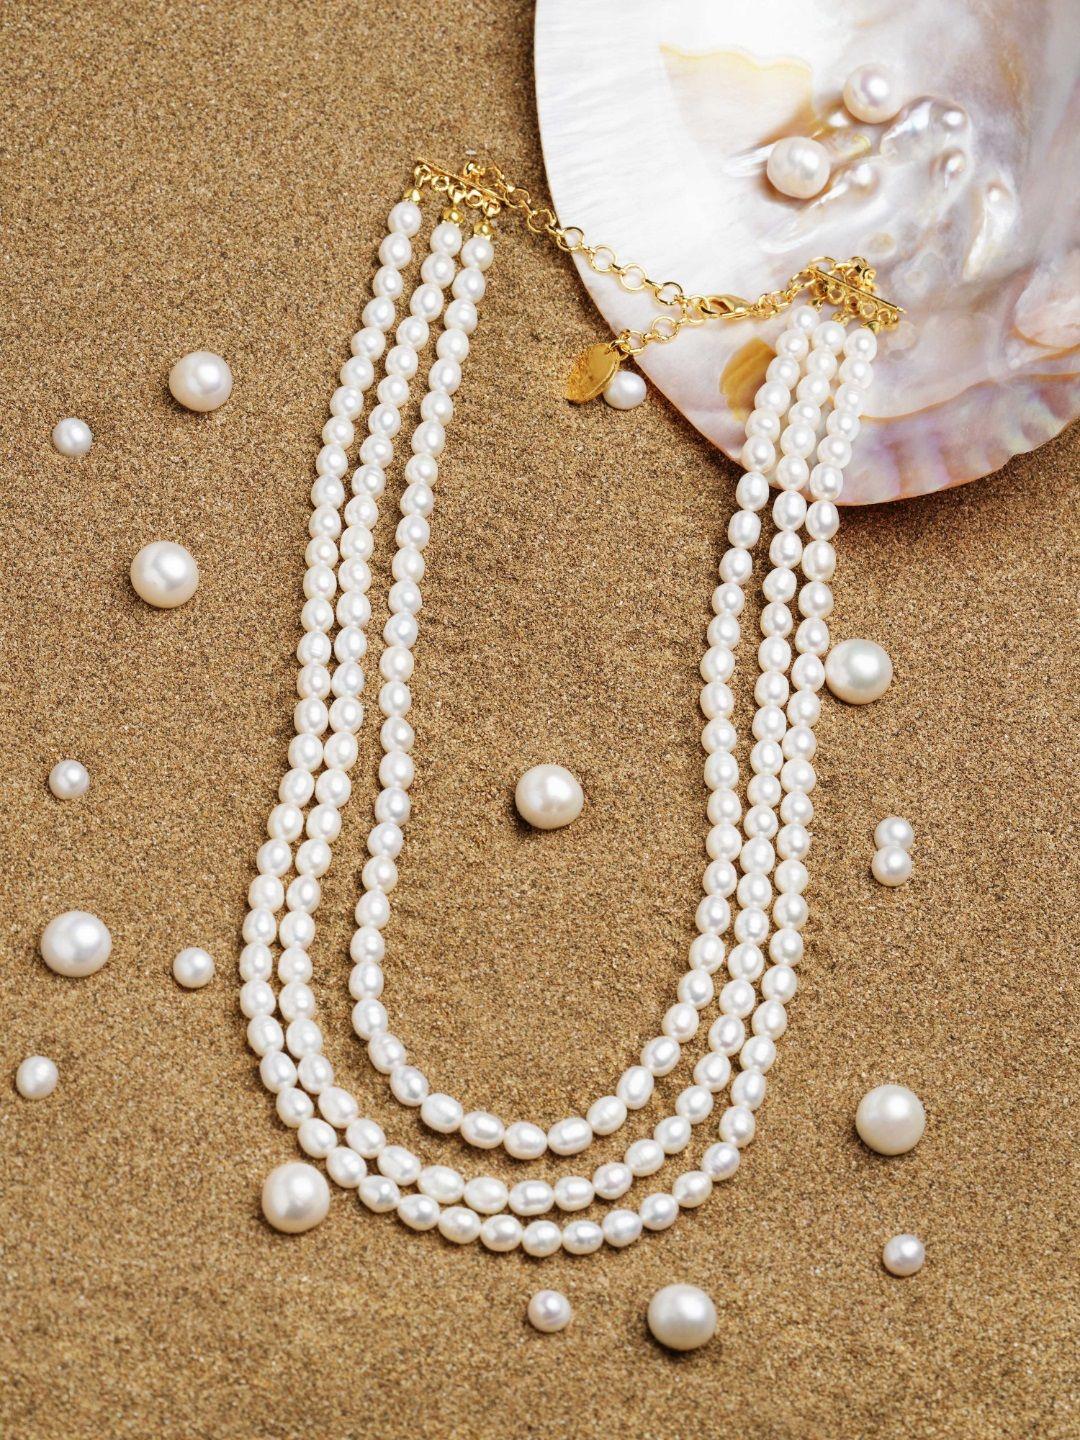 zaveri pearls off white freshwater rice pearls aaa+ quality 3 layers necklace